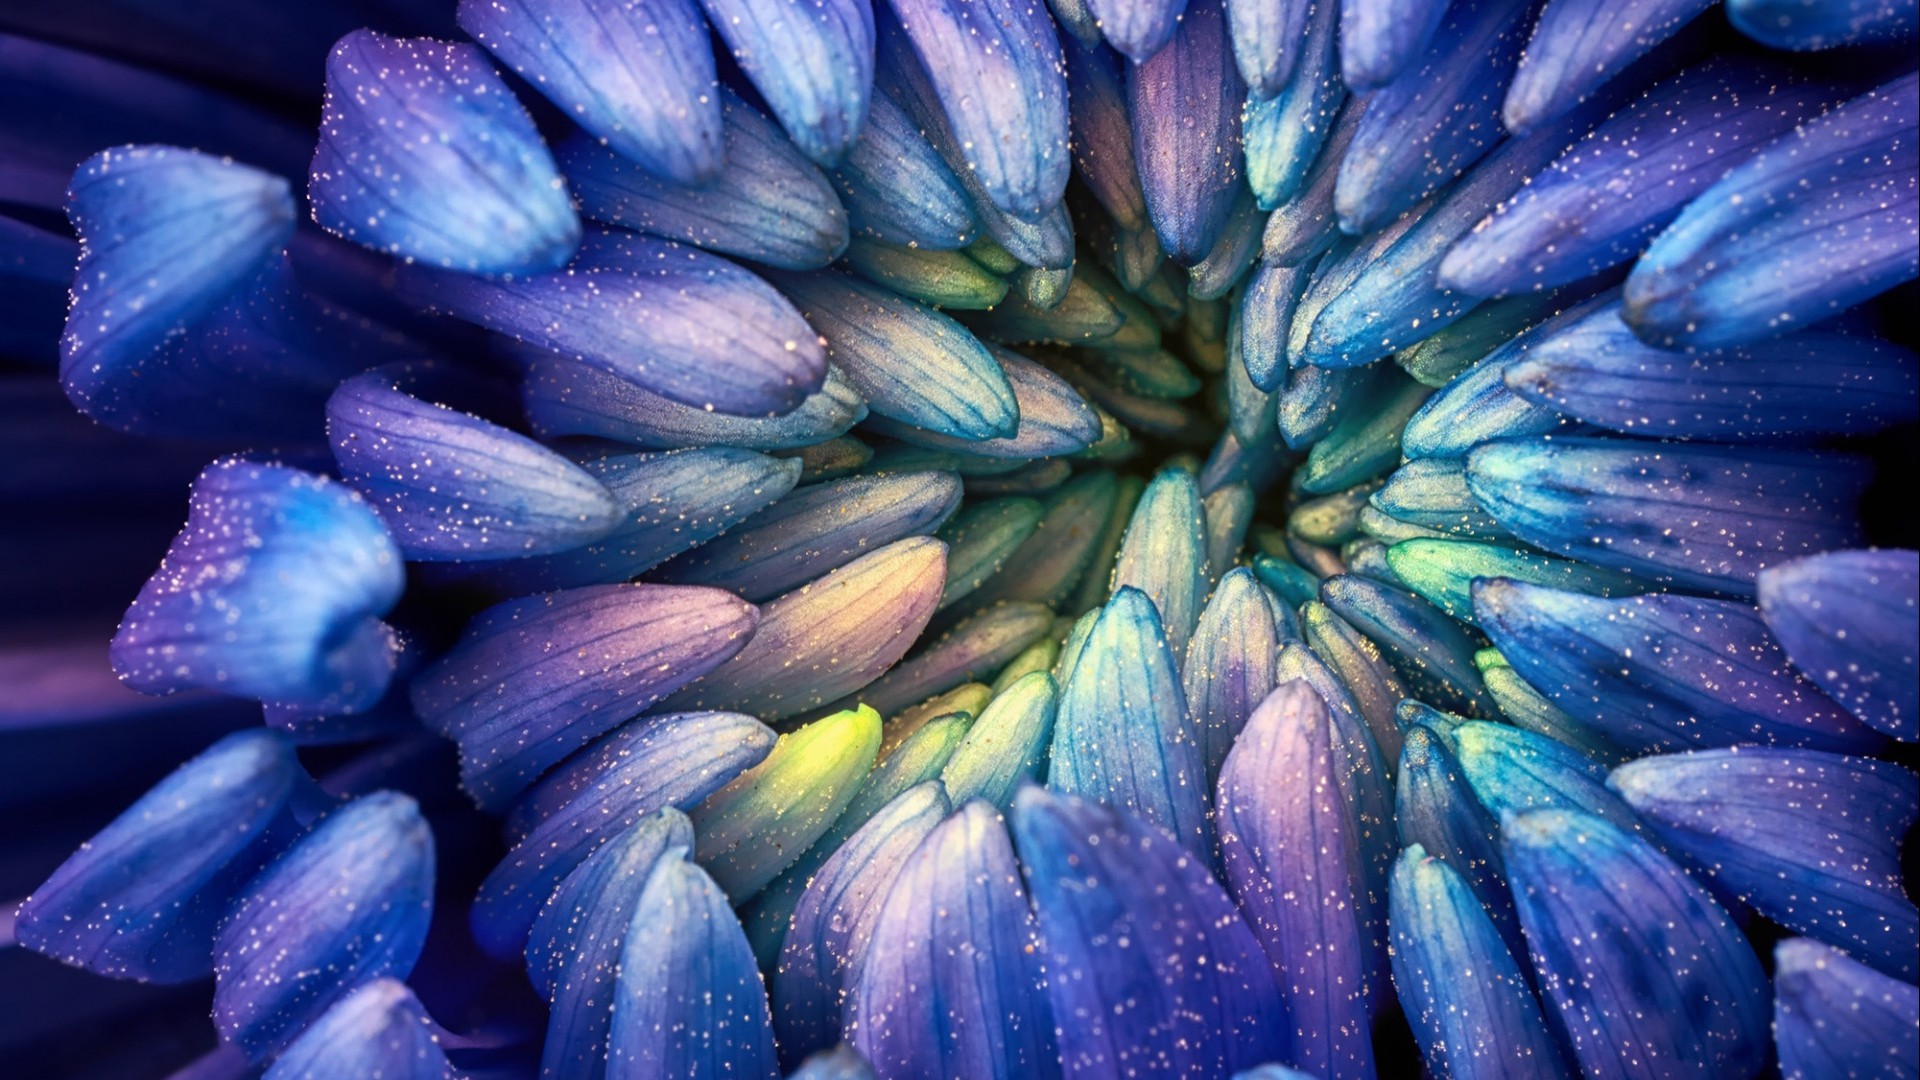 Christopher Johnson, Abstract, Colorful, Photography, Flowers, Macro, Petals, Pollen, Blue Wallpaper